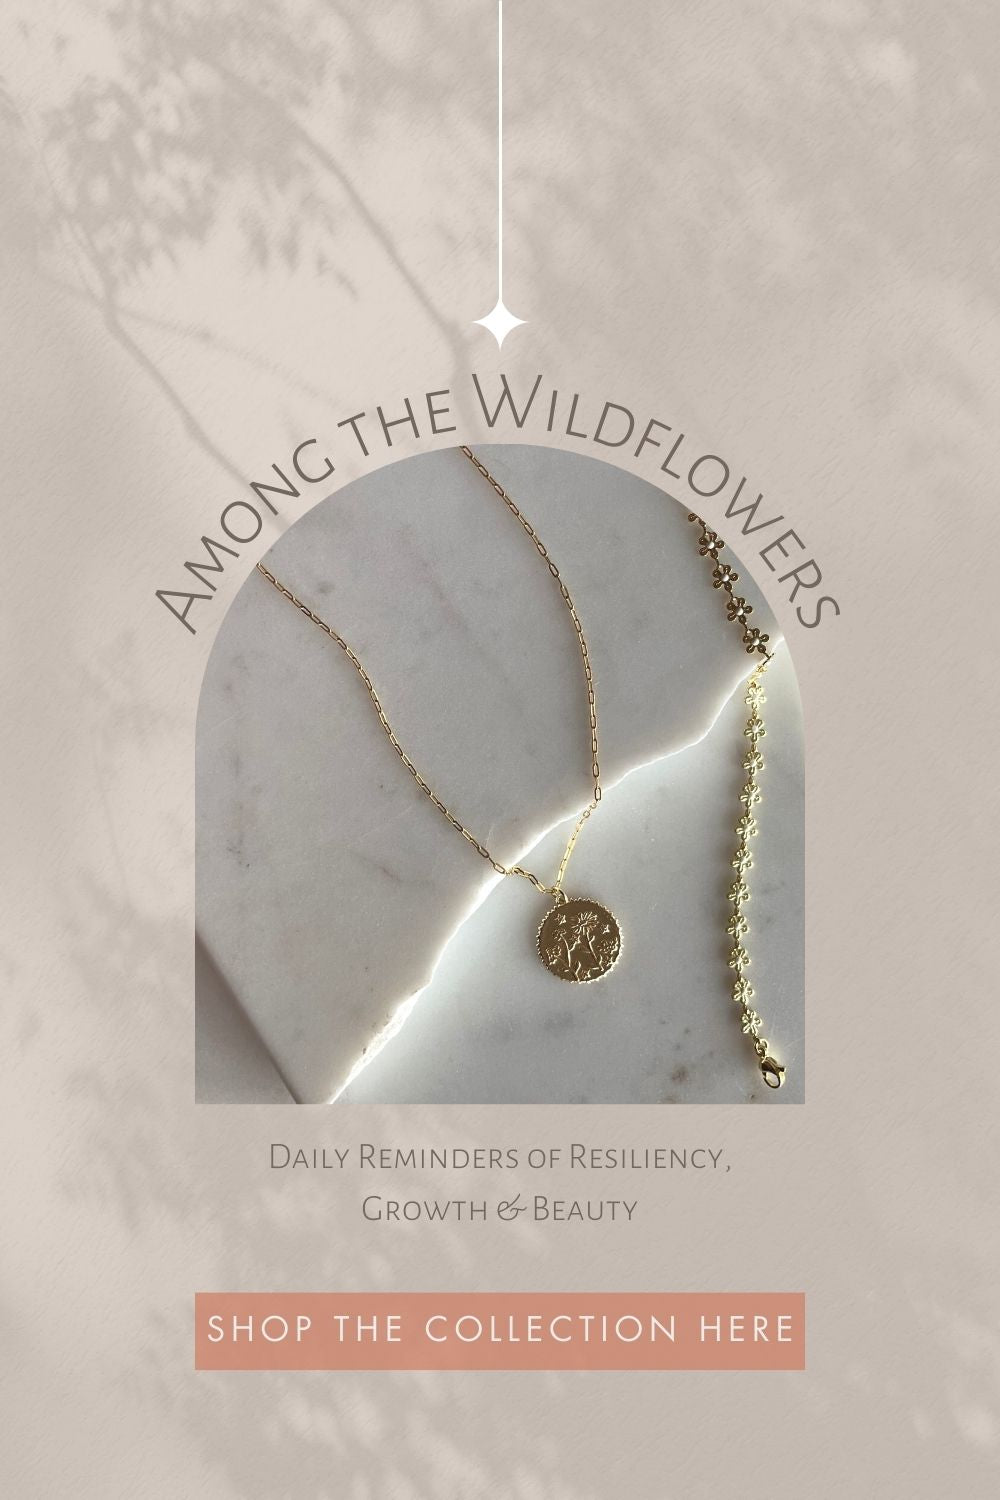 among the wildflowers, a jewelry collection of Daily Reminders of Resiliency, Growth & Beauty